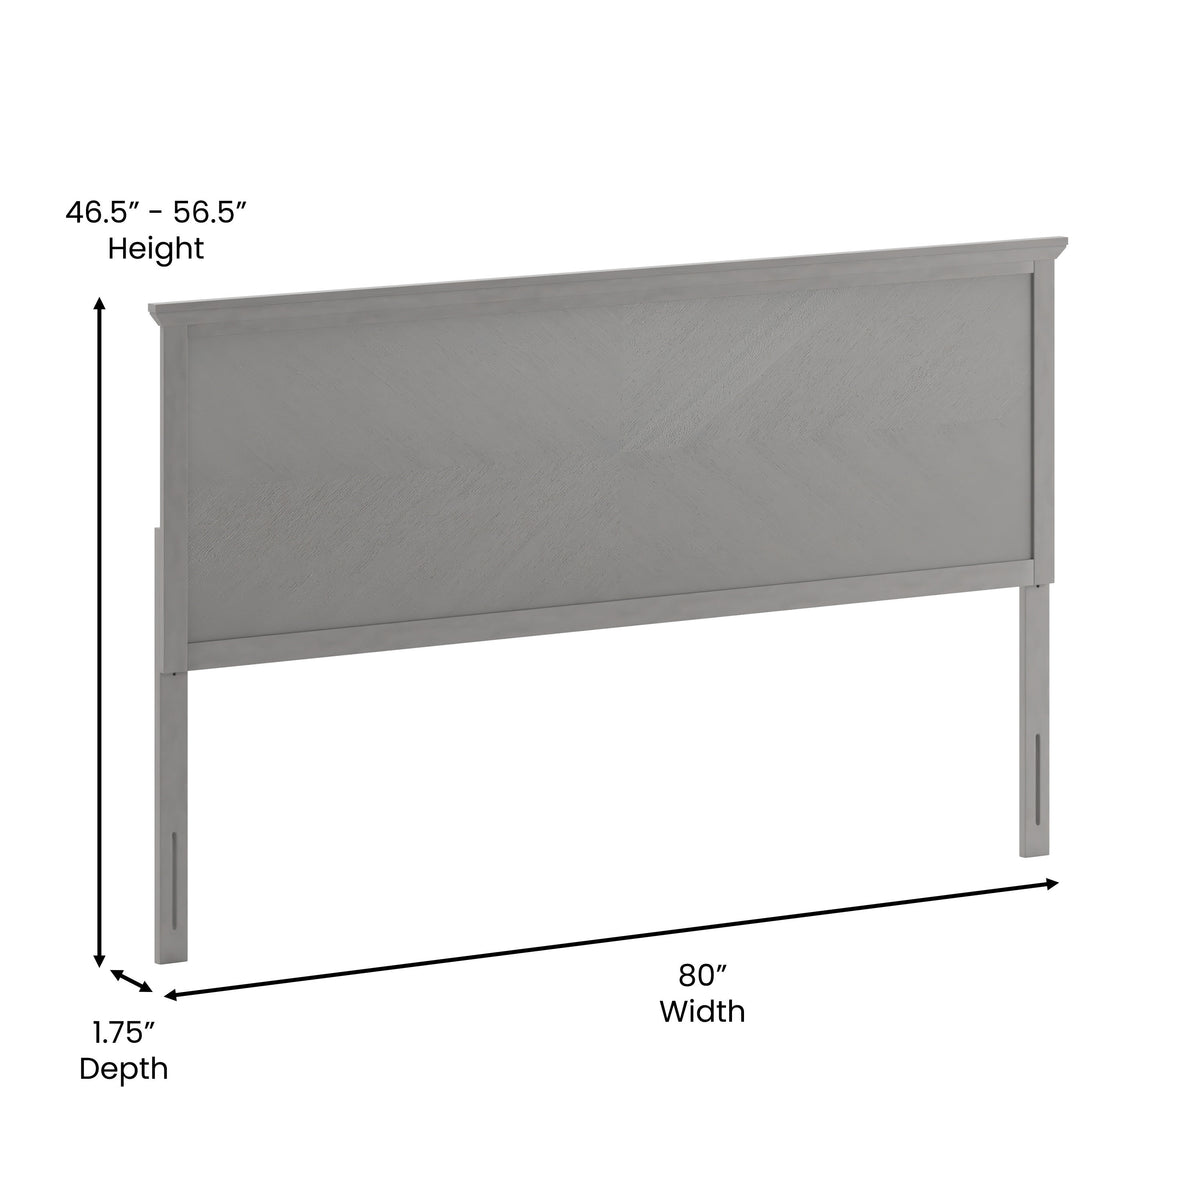 Gray Wash,King |#| Contemporary King Size Herring Bone Wooden Headboard Only in Gray Wash